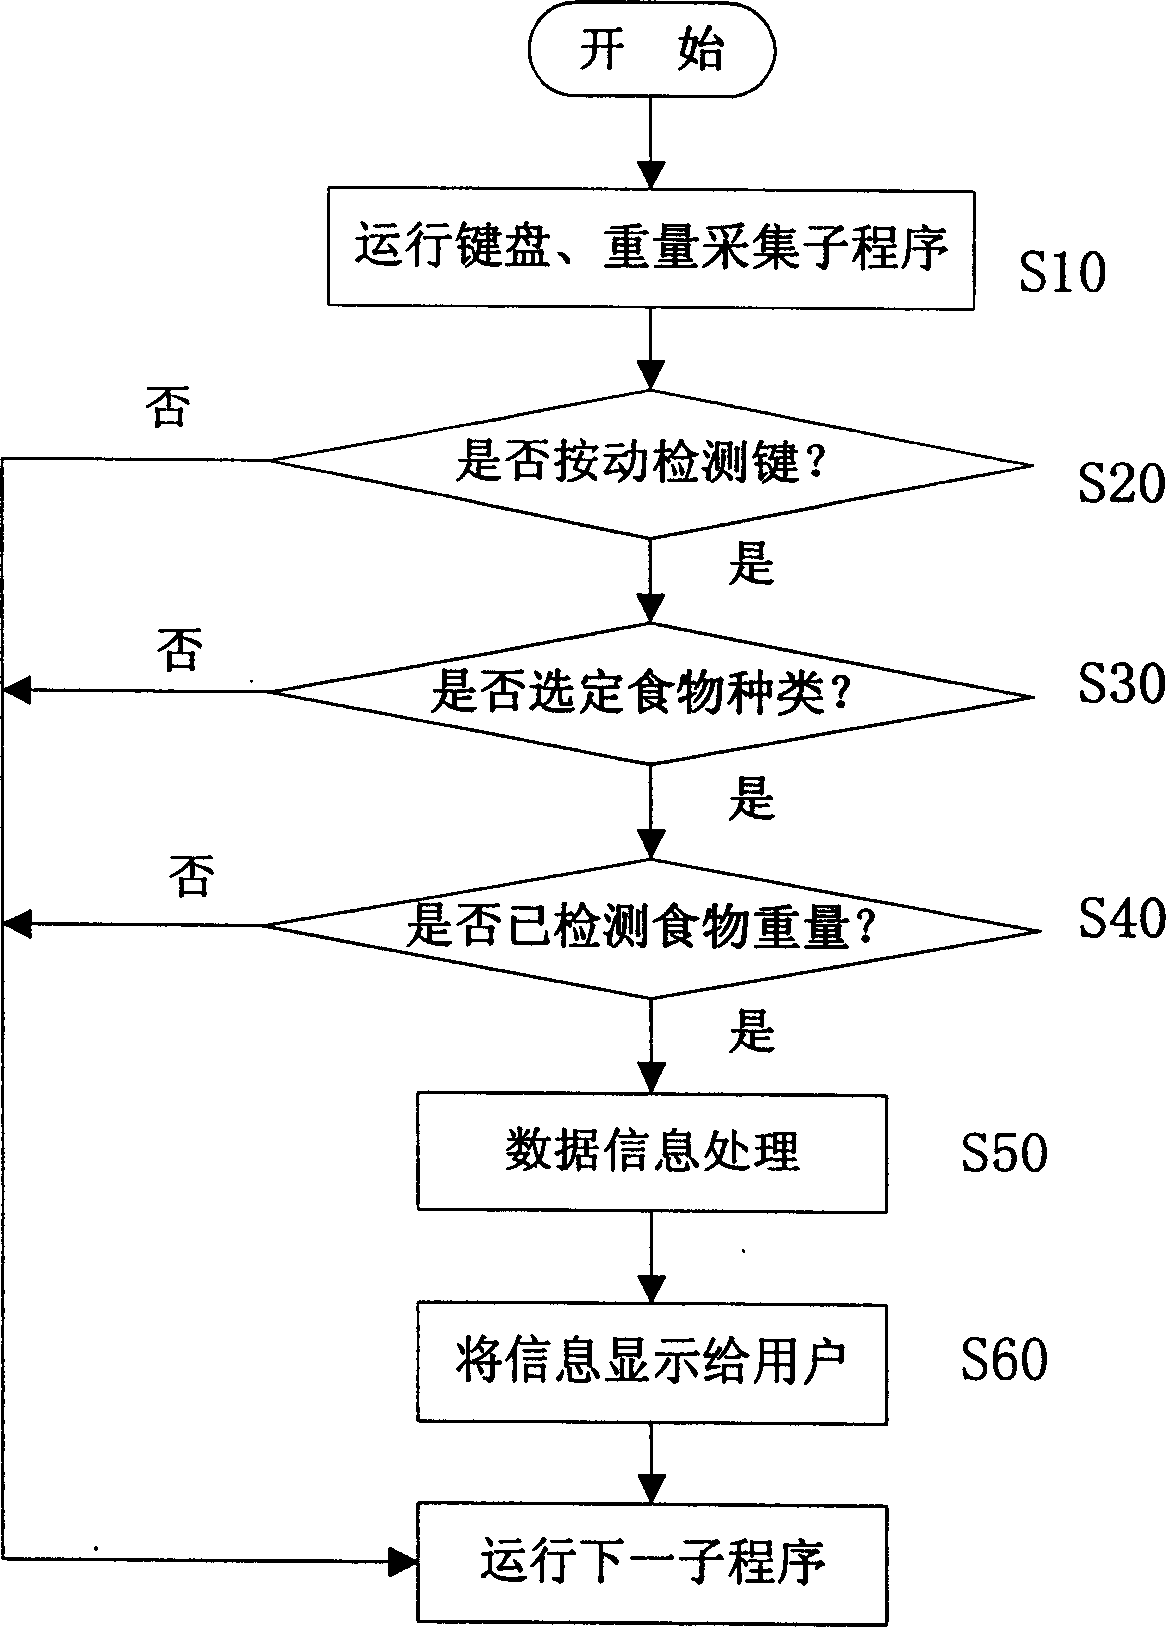 Device and method for analyzing food nutrition components of mirowave oven